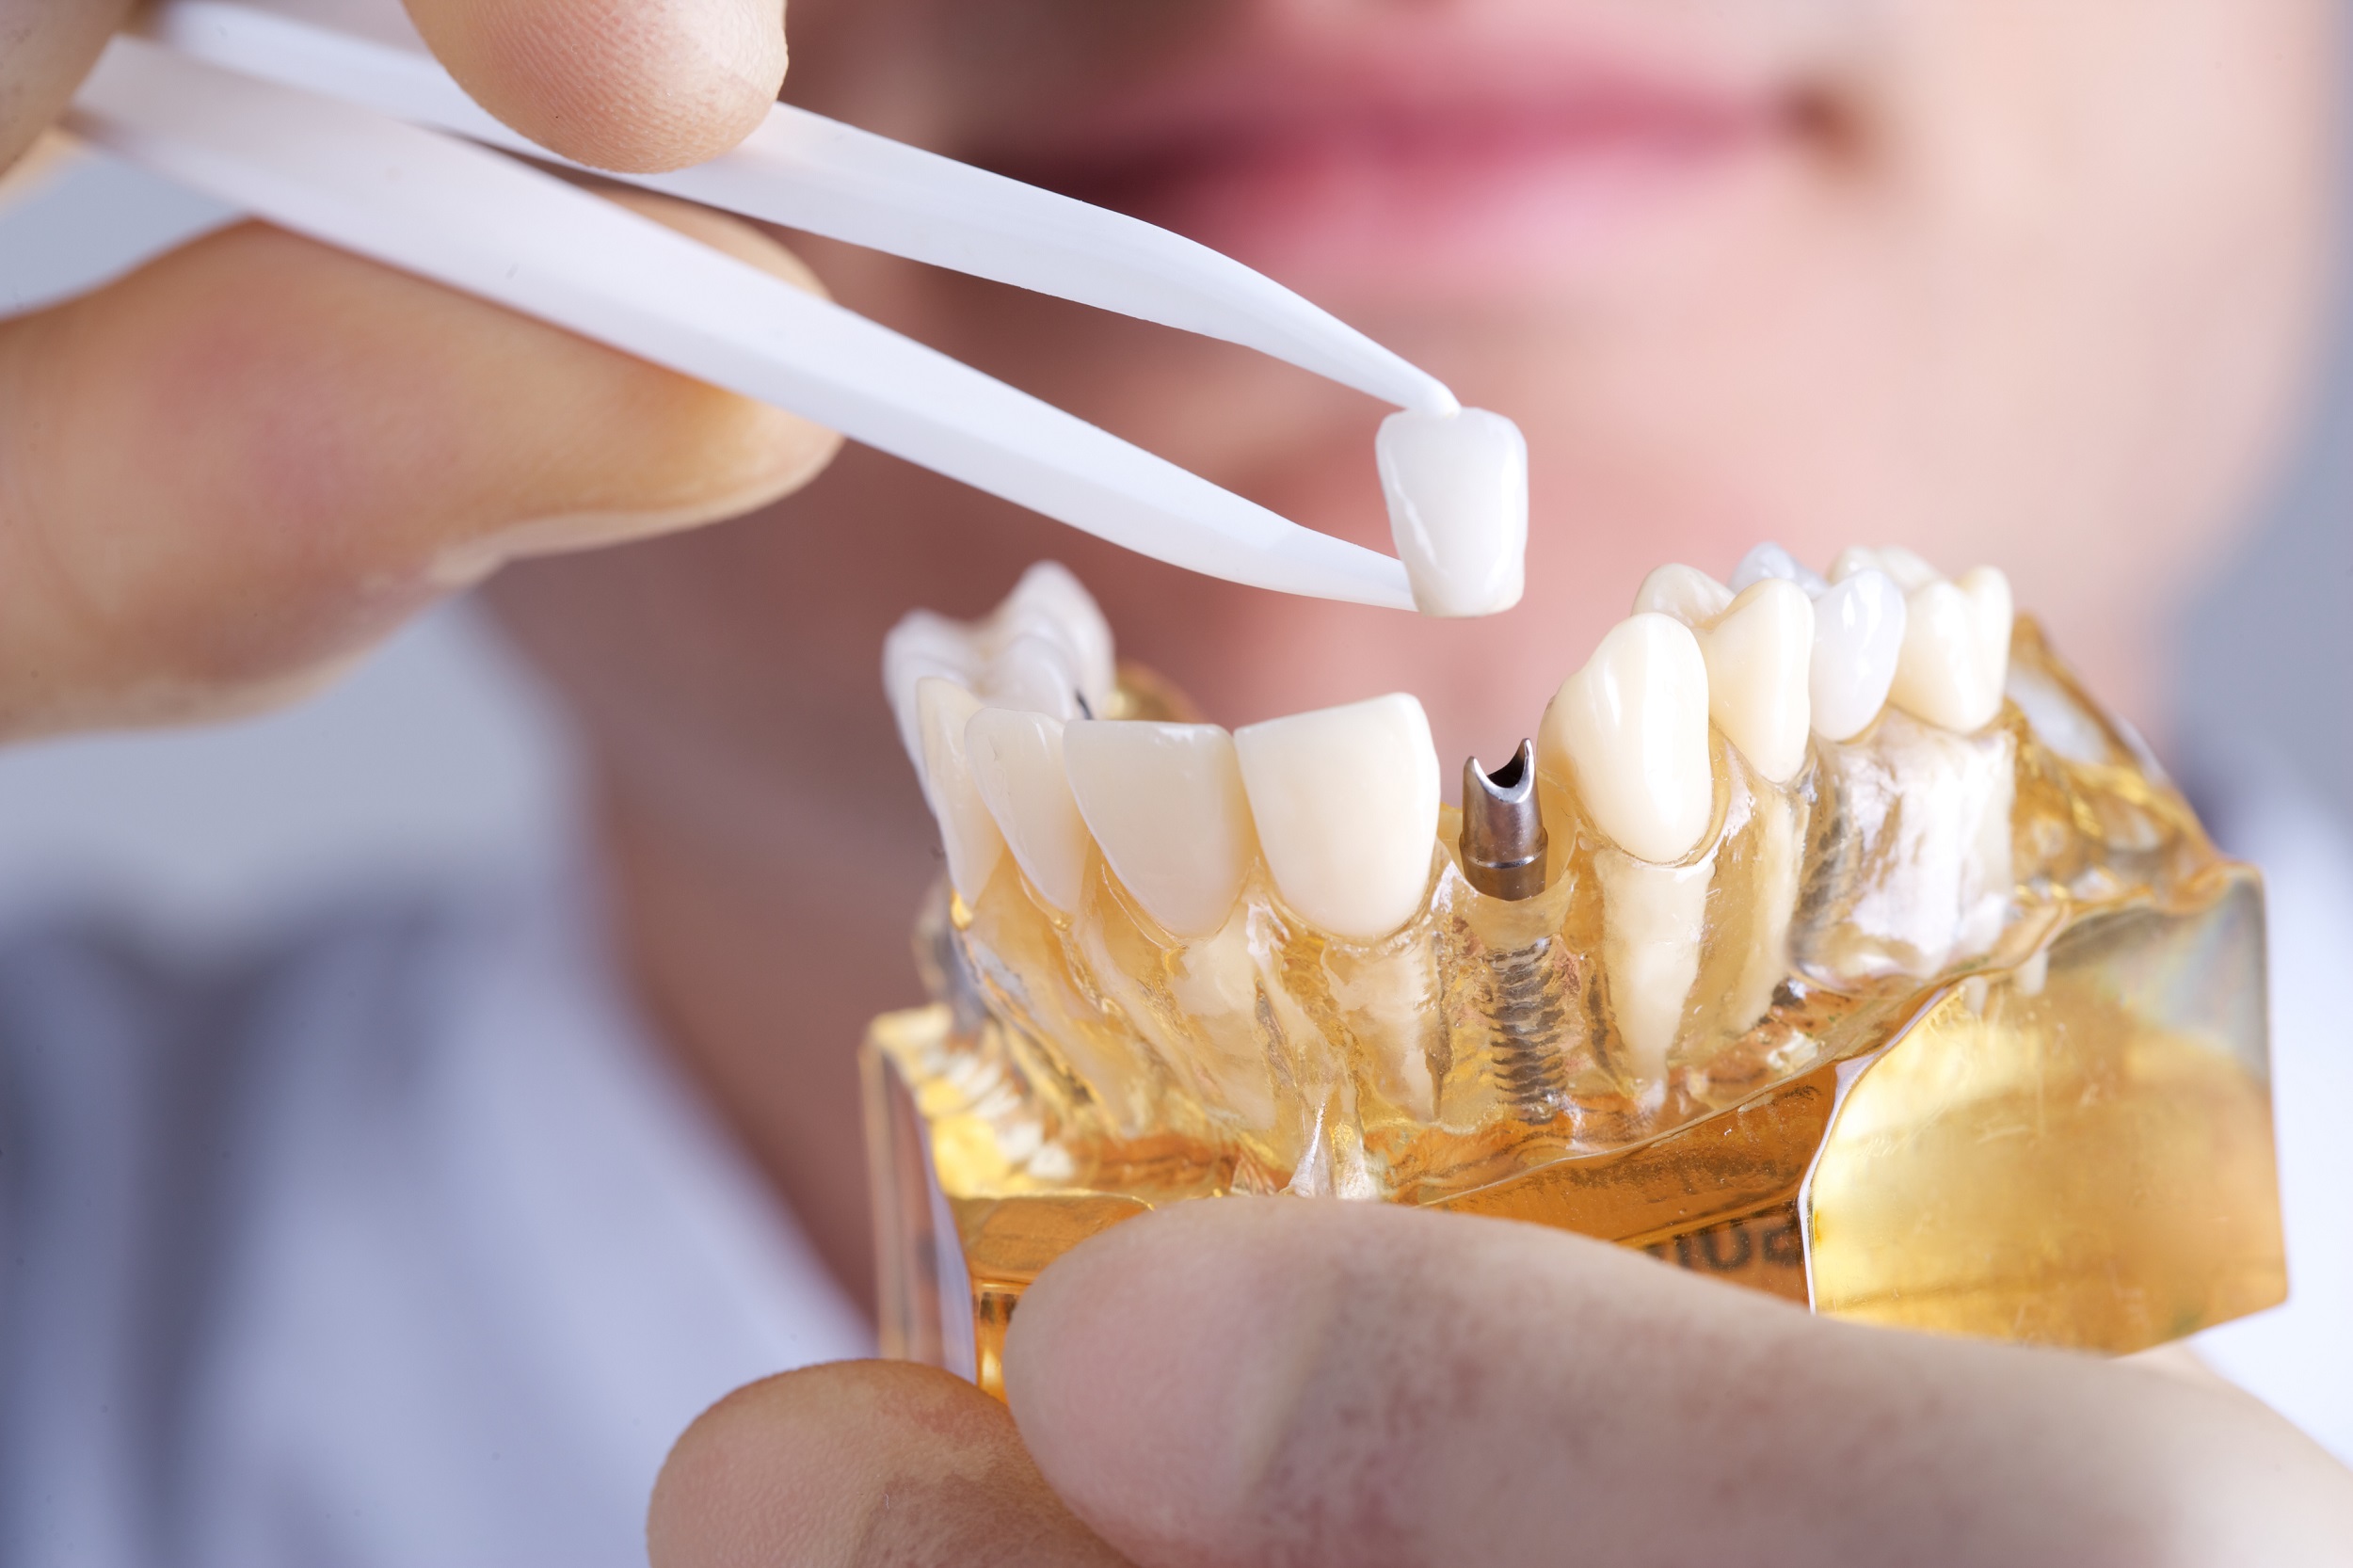 what is involved in a dental implant procedure